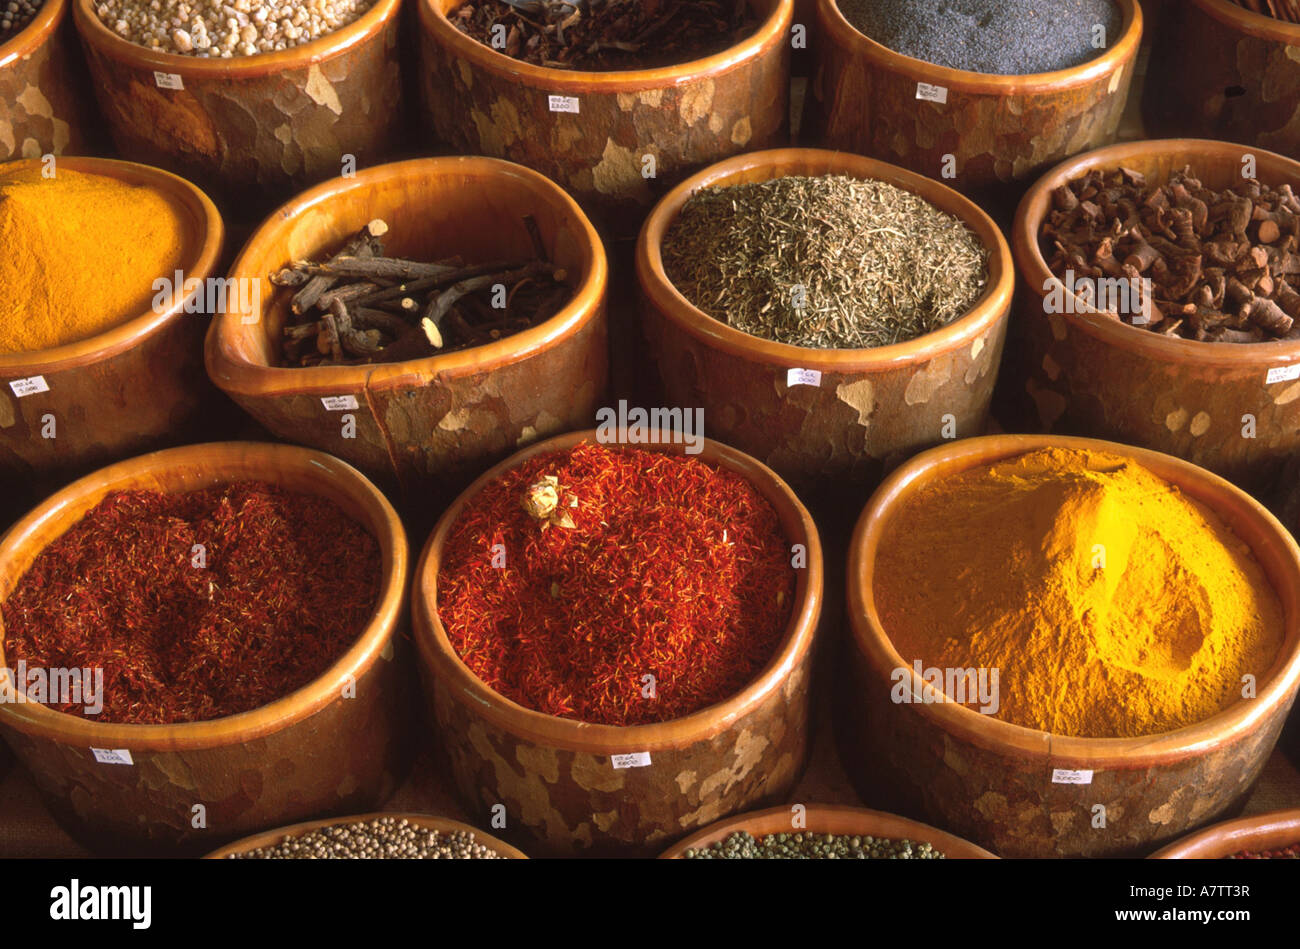 Spice on sale in market Stock Photo